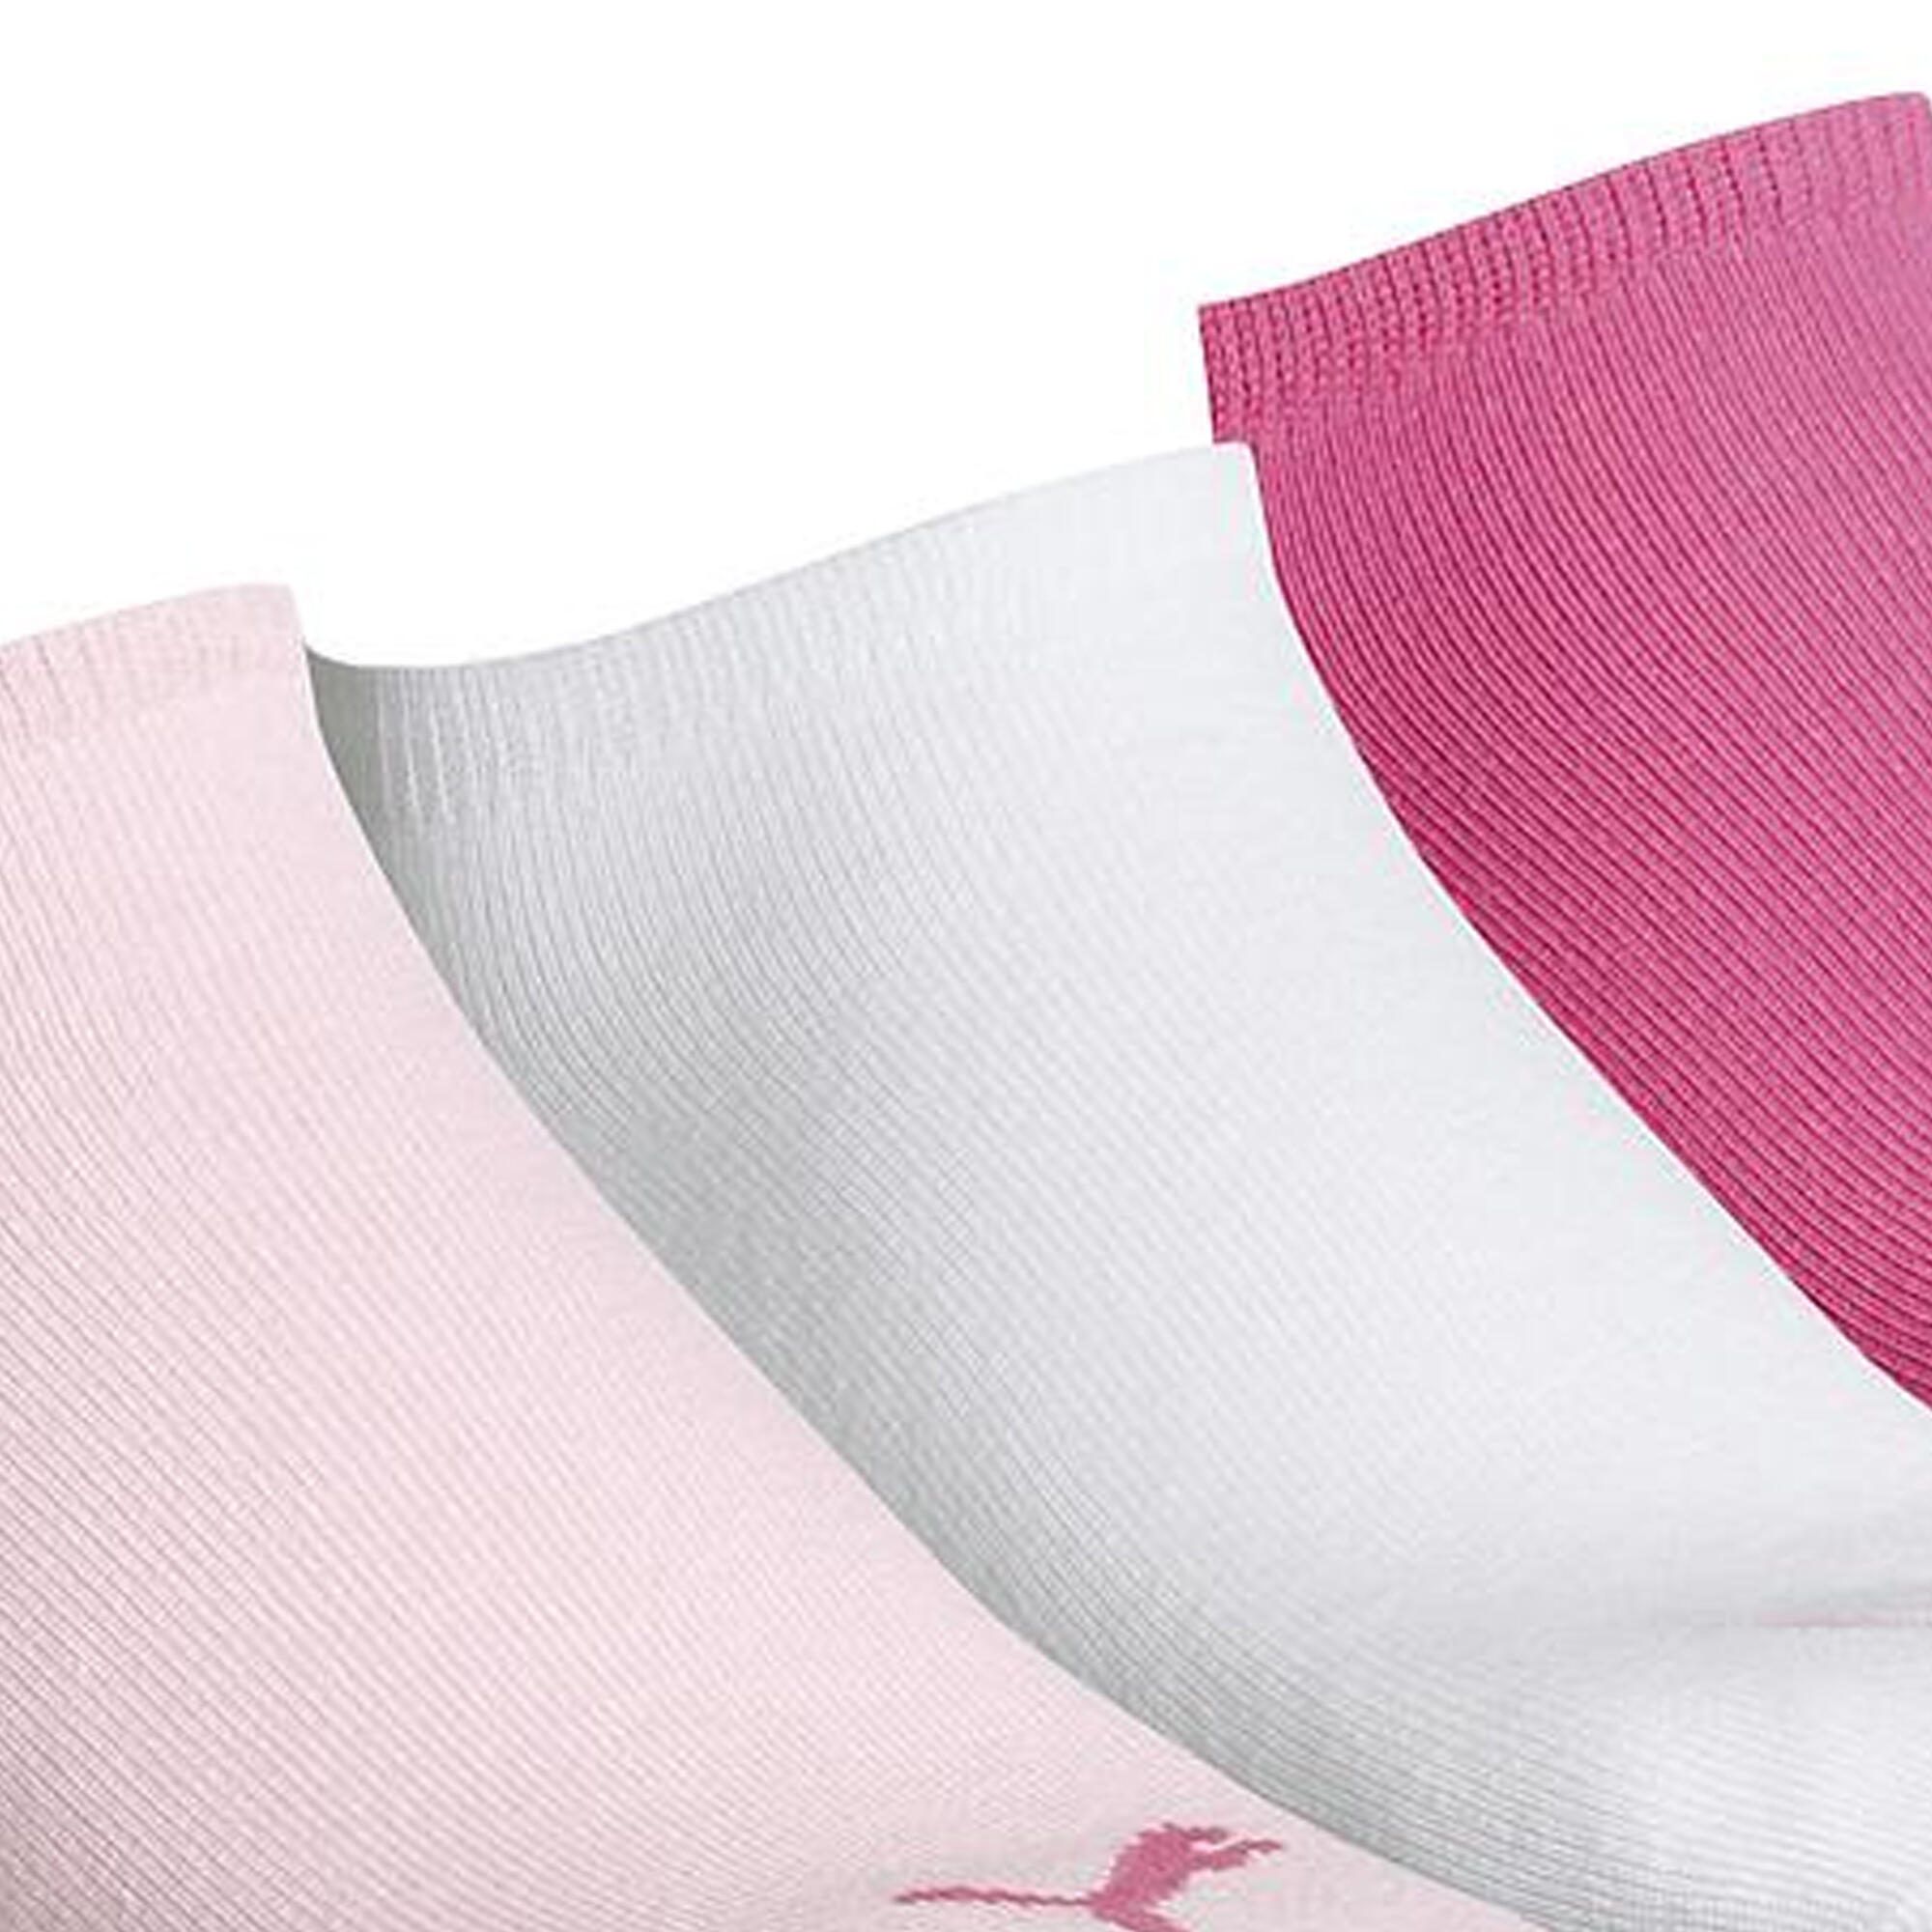 Unisex Adult Invisible Socks (Pack of 3) (Pink) 3/3